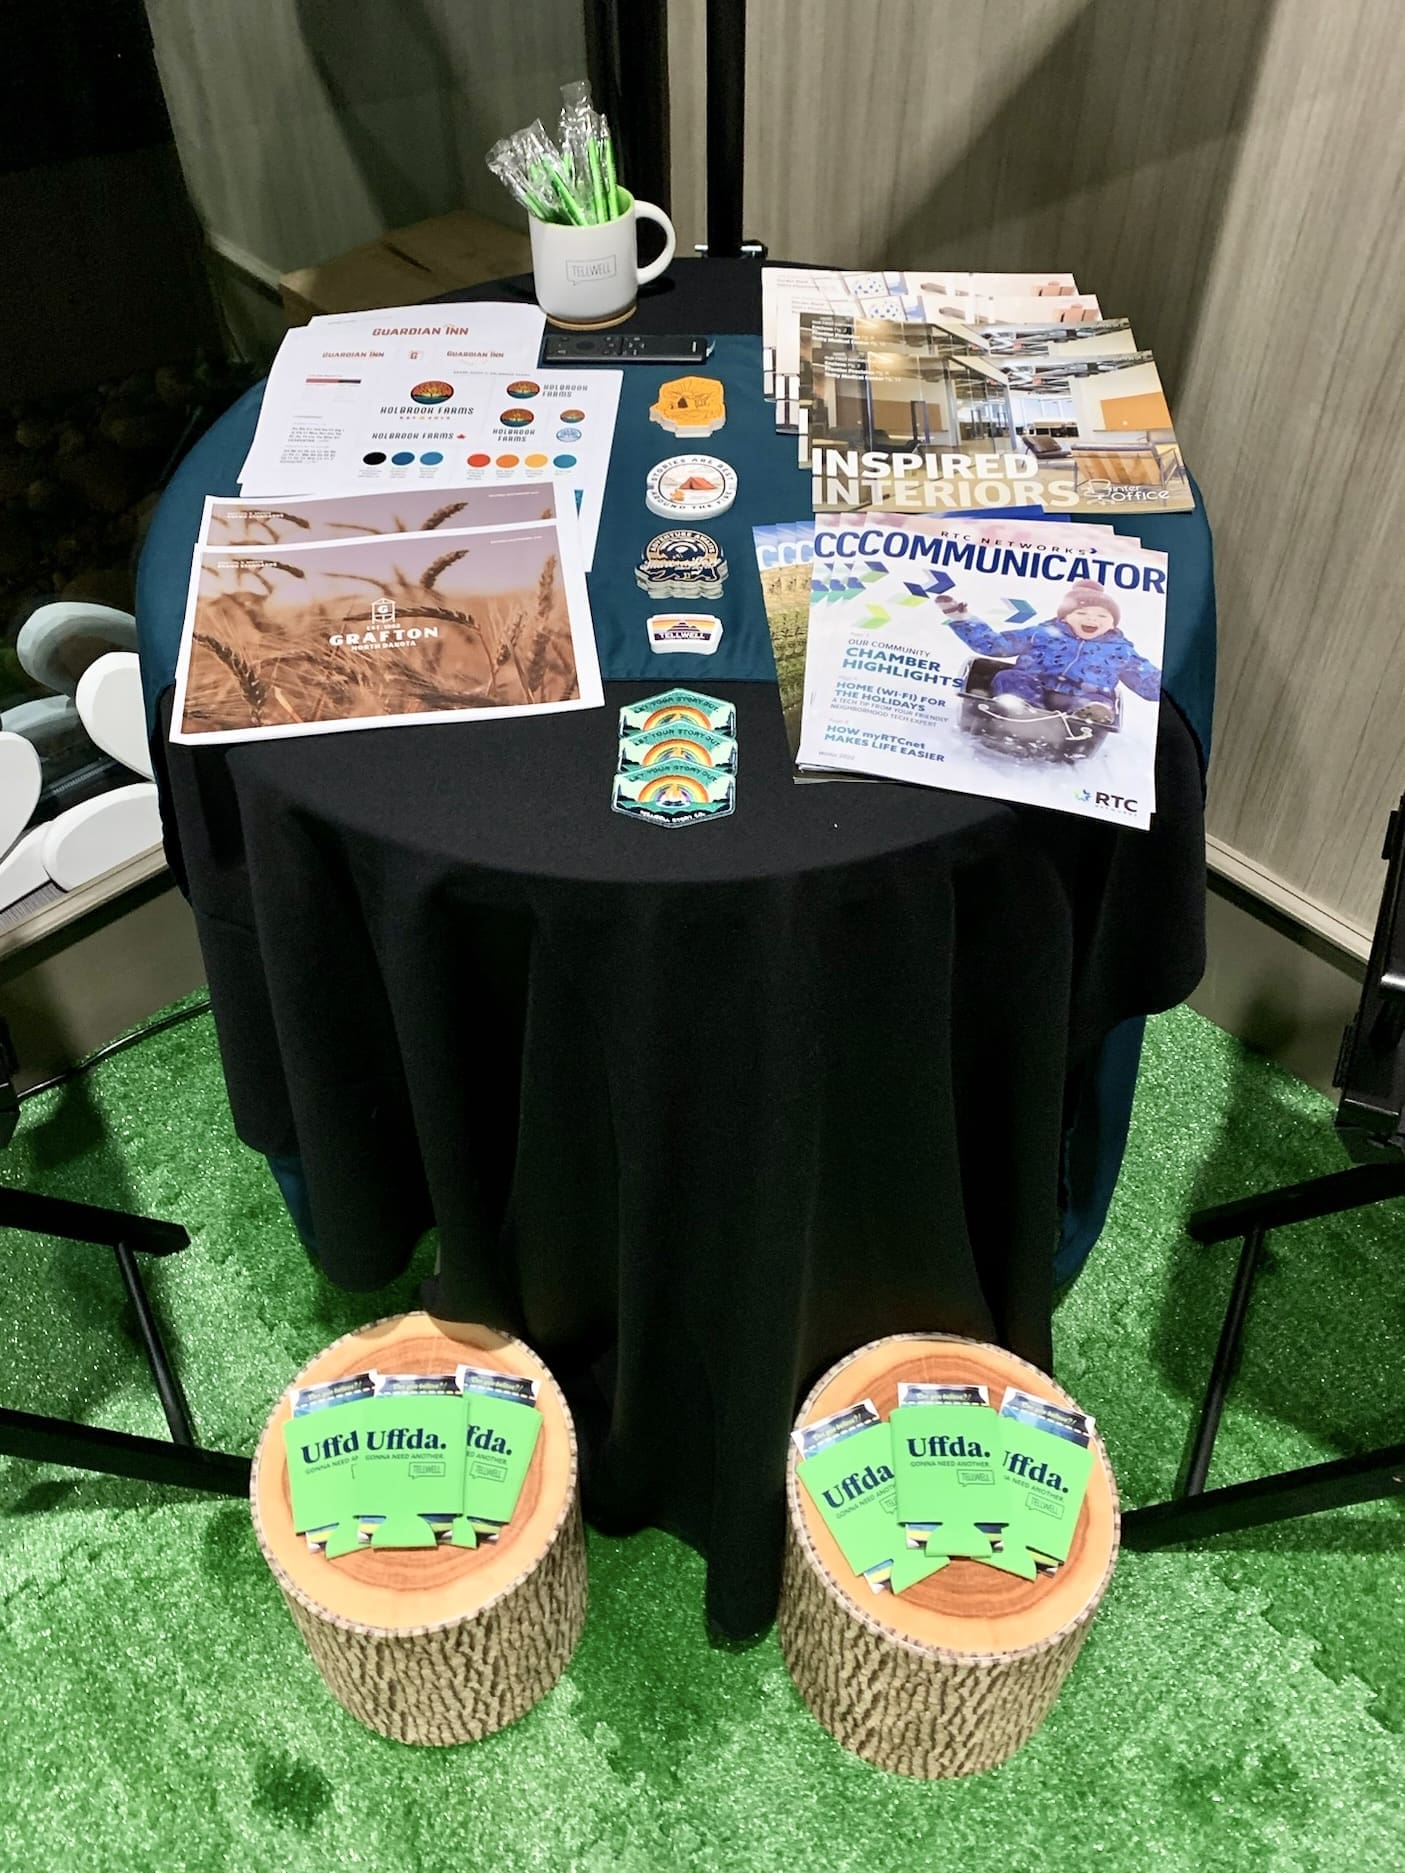 An informational table at an event with a black cloth covering, displaying various printed materials. There are brochures, pamphlets titled 'INSPIRED INTERIORS' and 'COMMUNICATOR', as well as a mug with pens and branded stickers. Two tree stump stools sit in front of the table, each with a stack of green 'Uffda' koozies on top. The setup is on faux grass flooring, suggesting an inviting, creative presentation.